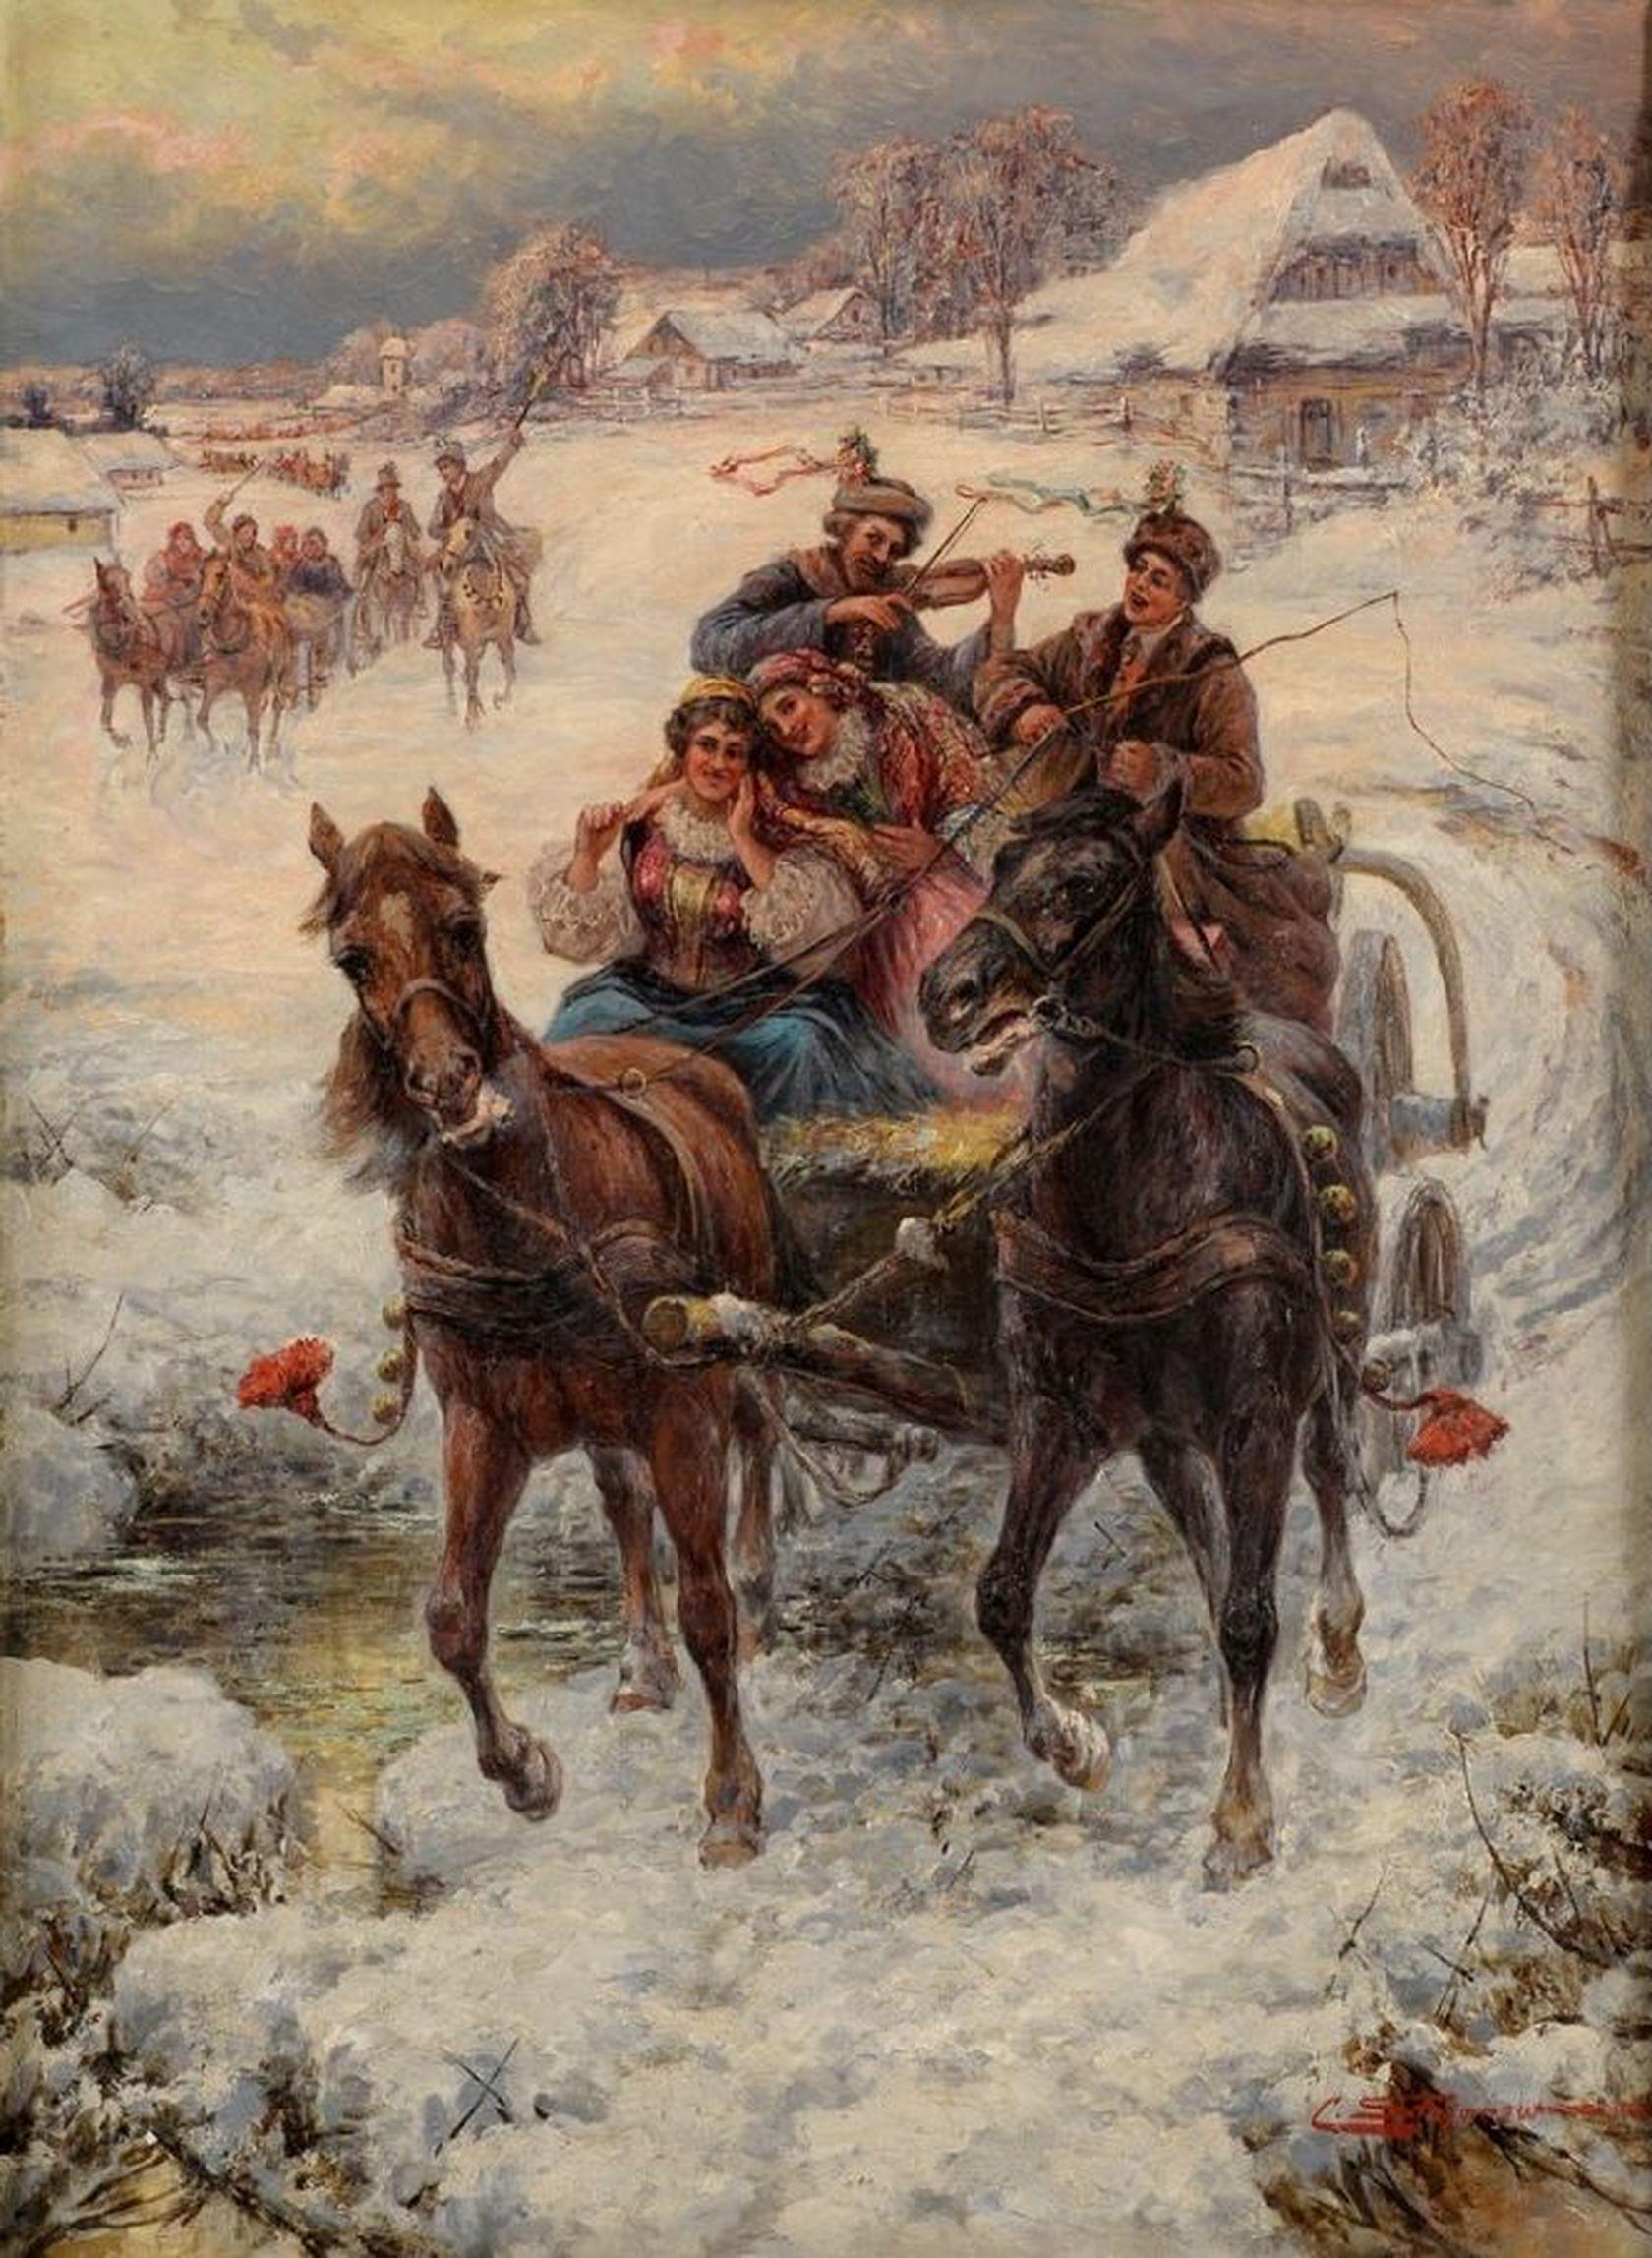 Winter ride with songs. 19 century, oil on canvas, 100x74 cm - Painting by Pjotr Constantin Stojanow